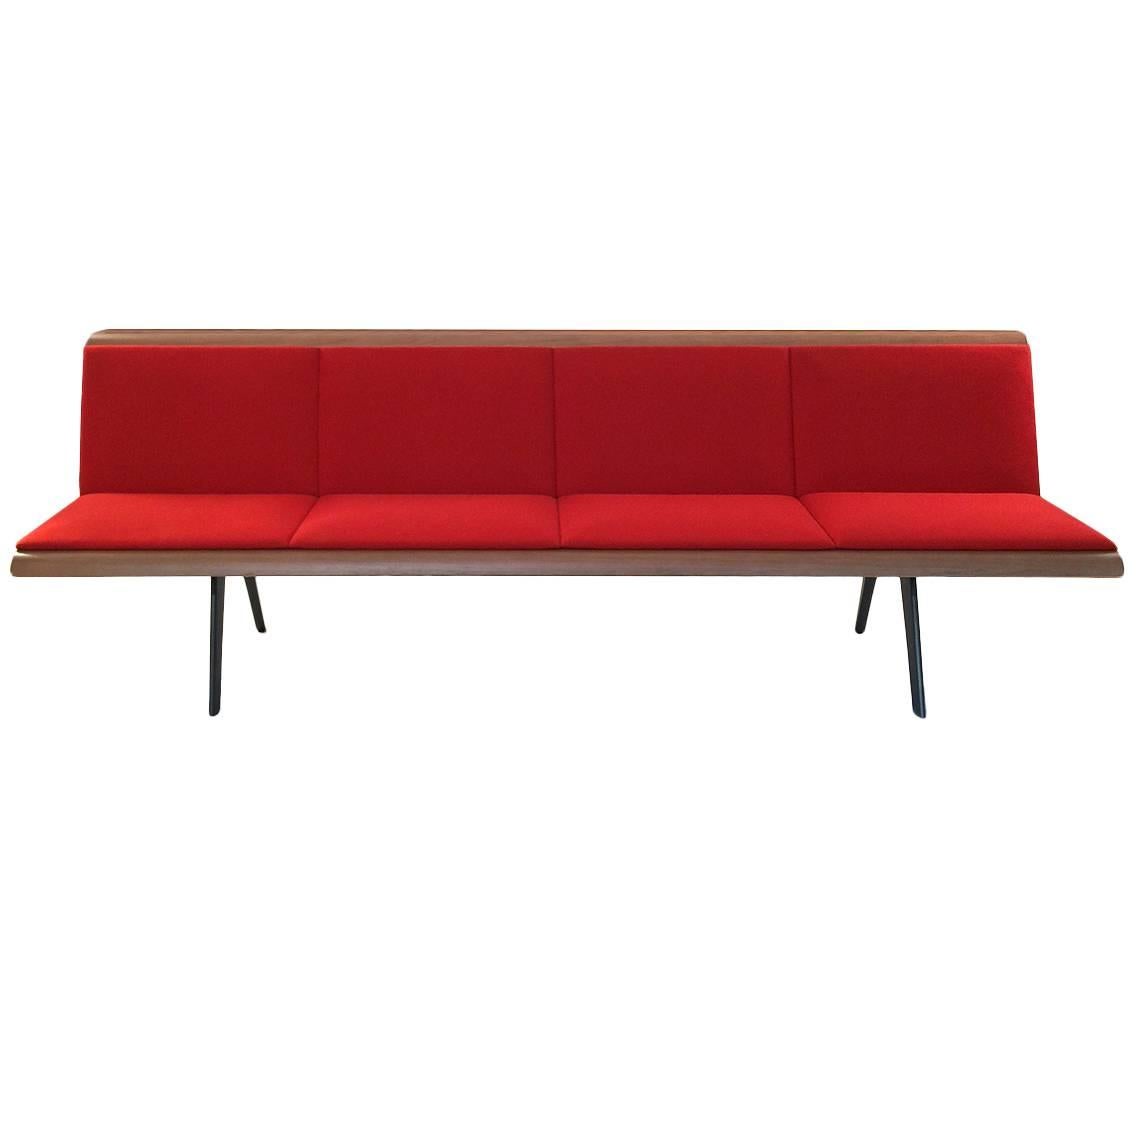 Red Zinta Four-Seat Bench by Lievore Altherr Molina for Arper, Italy Modern For Sale